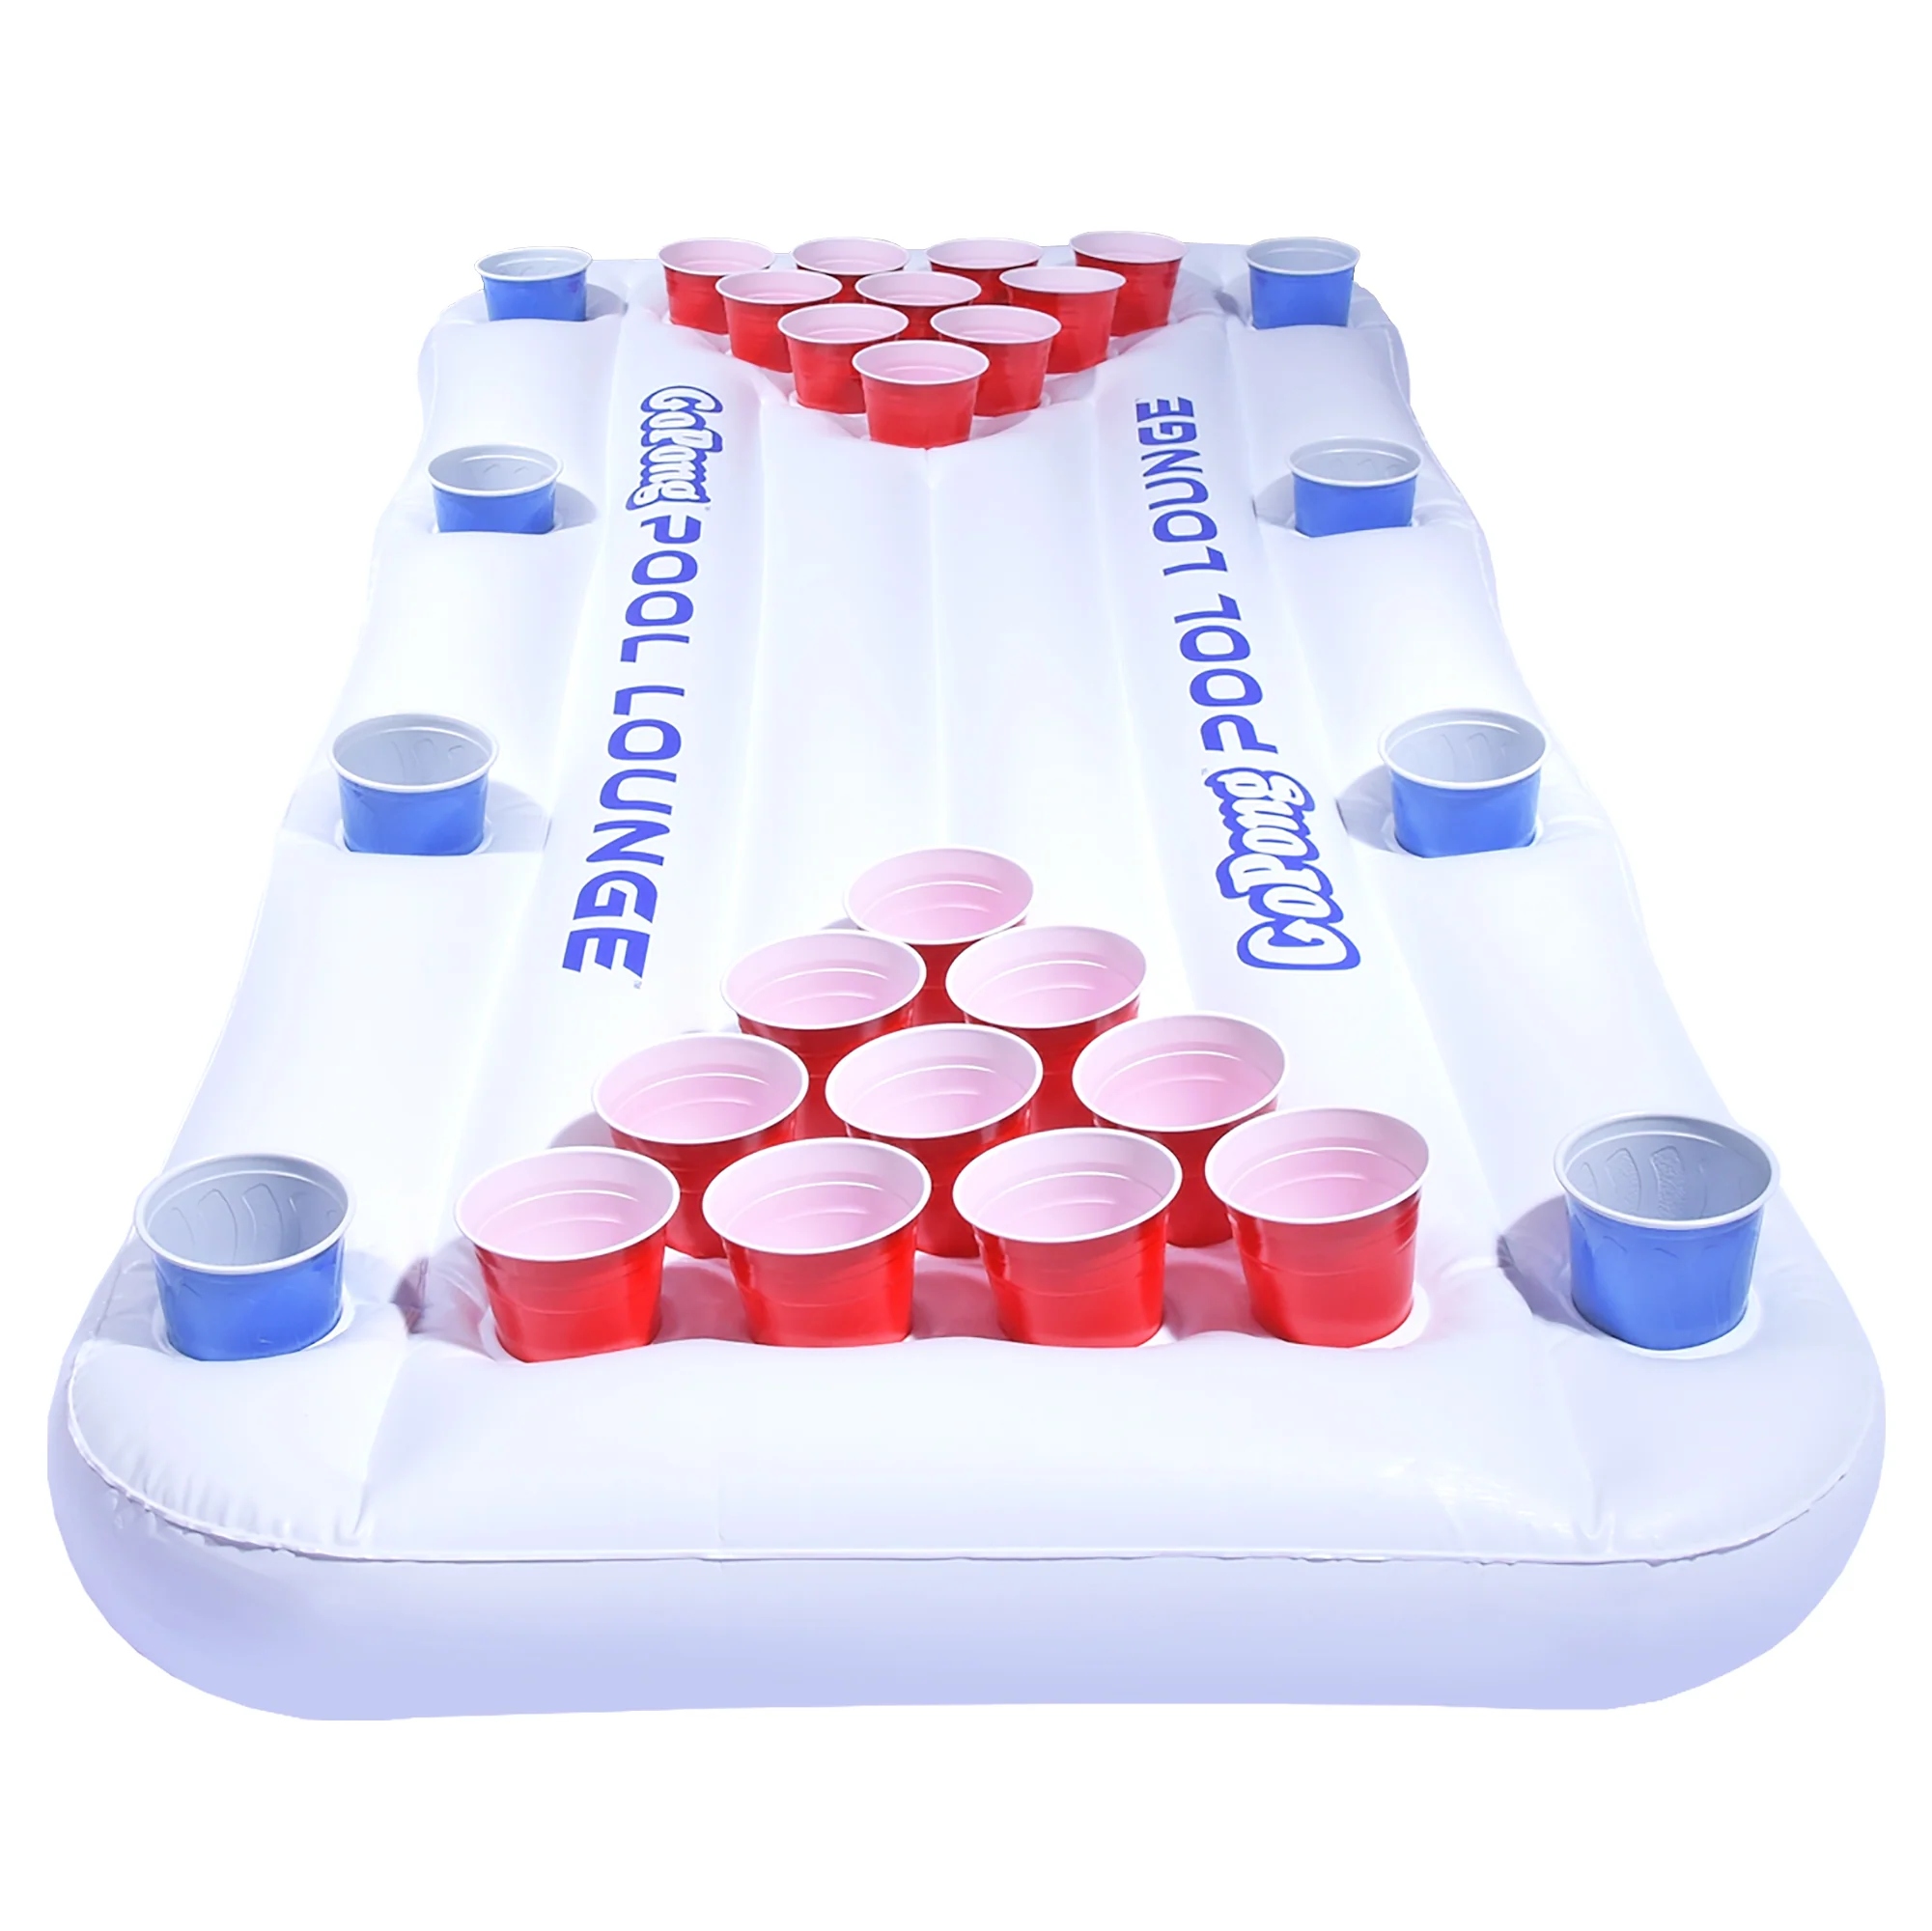 White colored Floating Beer Pong Raft with cups